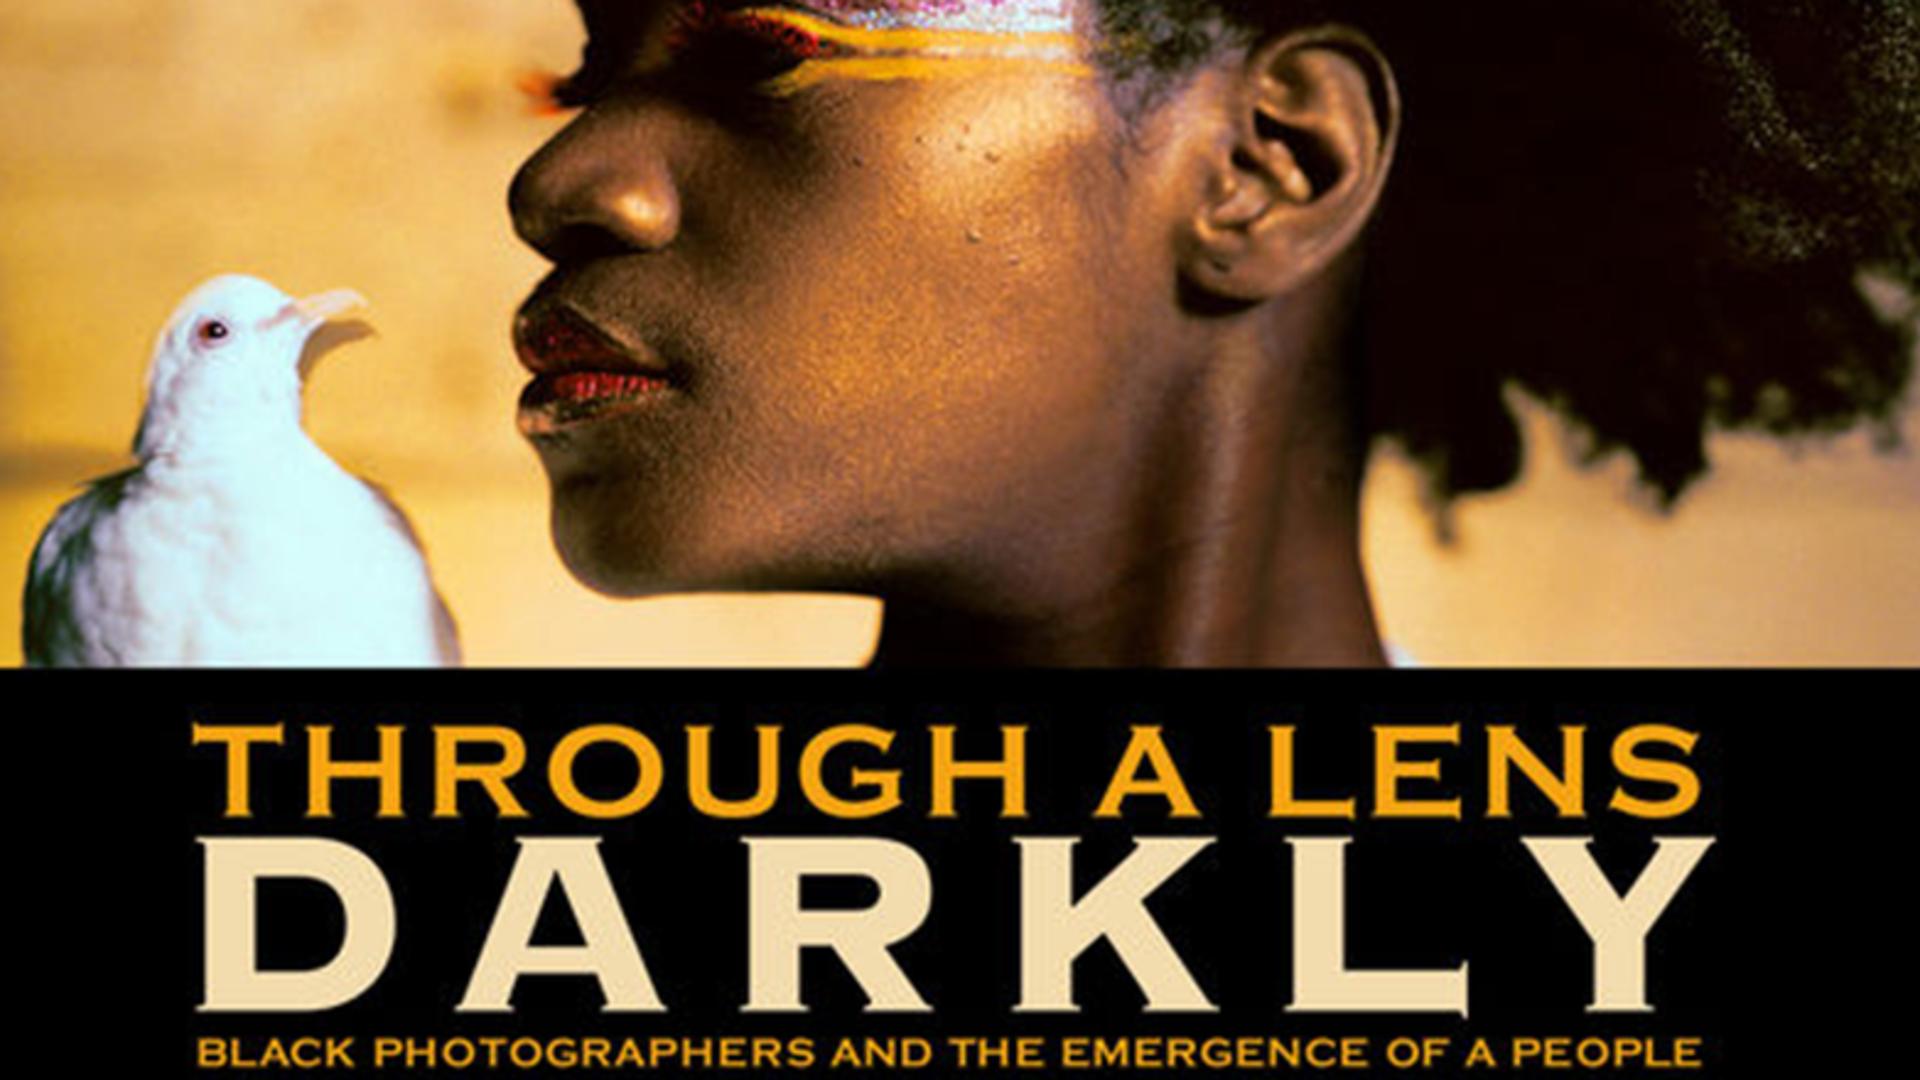 Panel Discussion + Q&A - Through a Lens Darkly: Black Photographers and the Emergence of a People